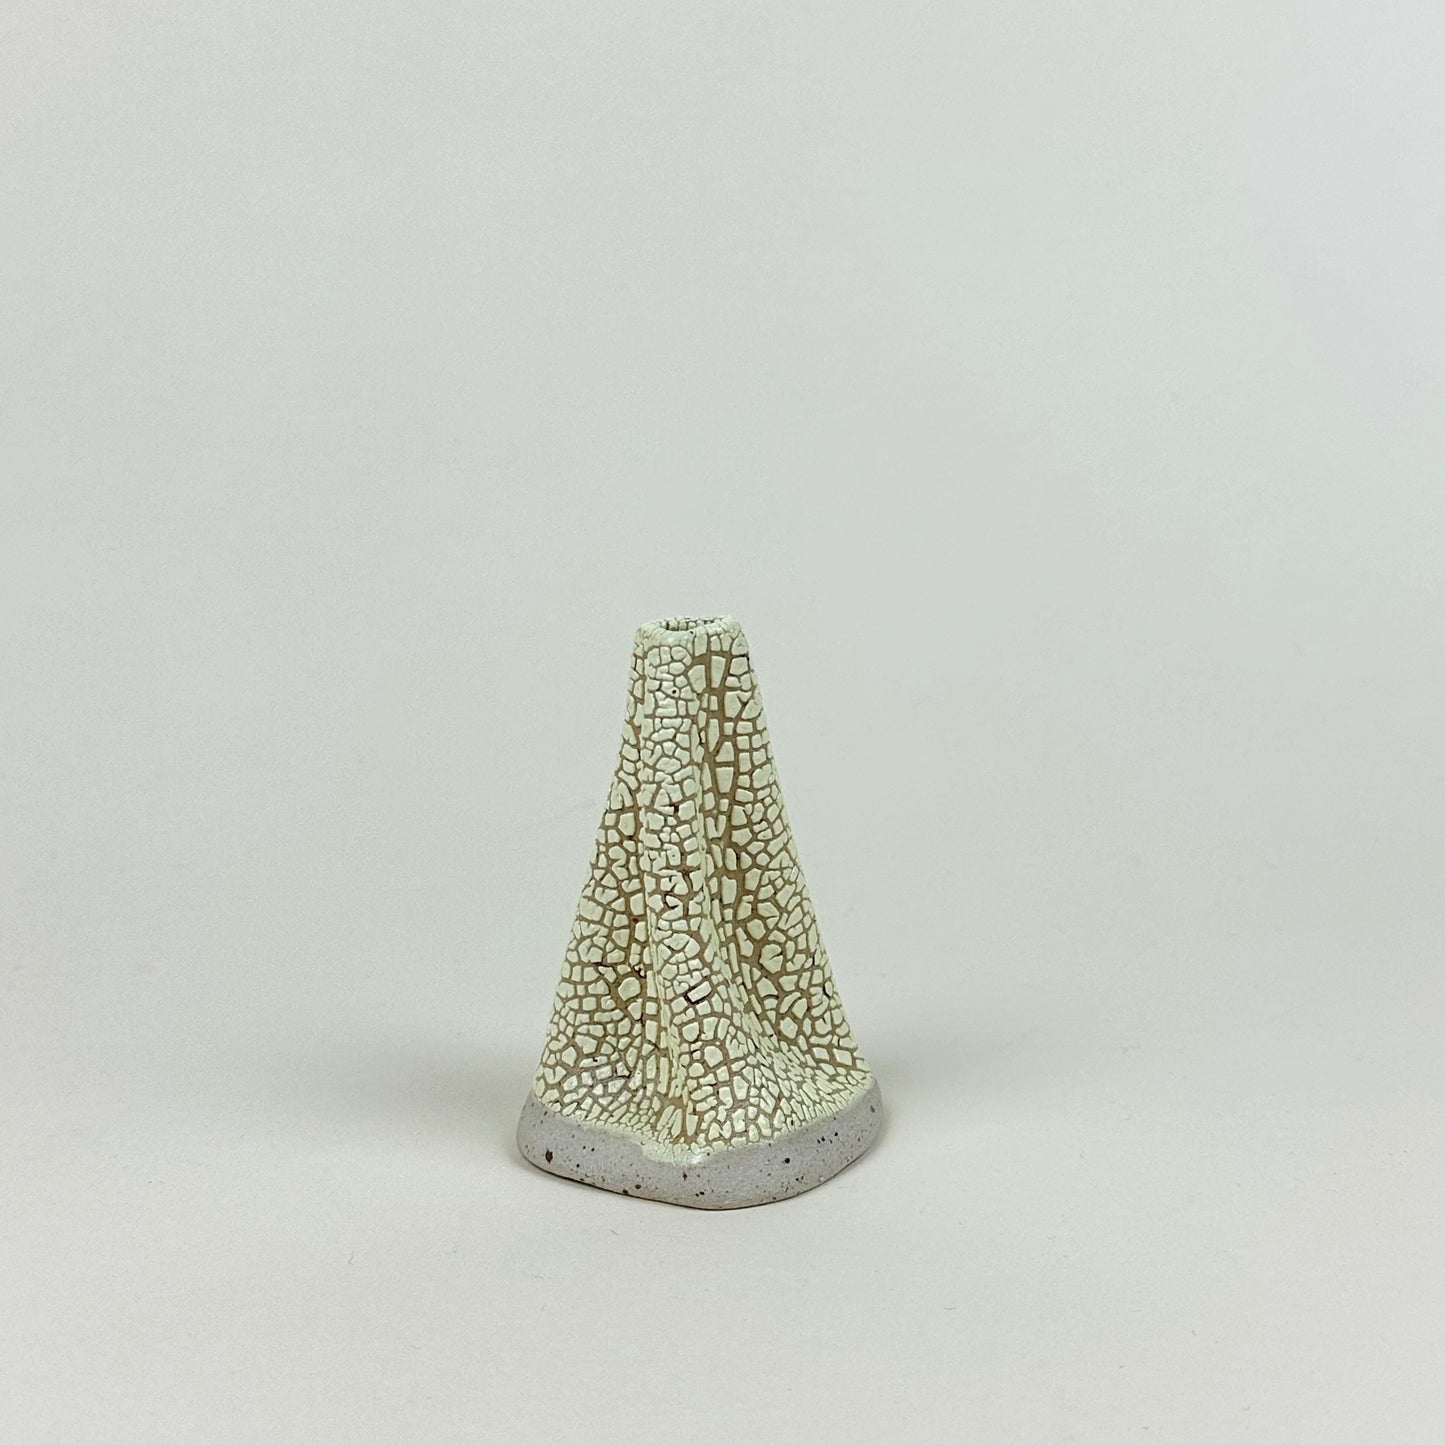 Stone and yellow volcano vase (S) by Astrid Öhman